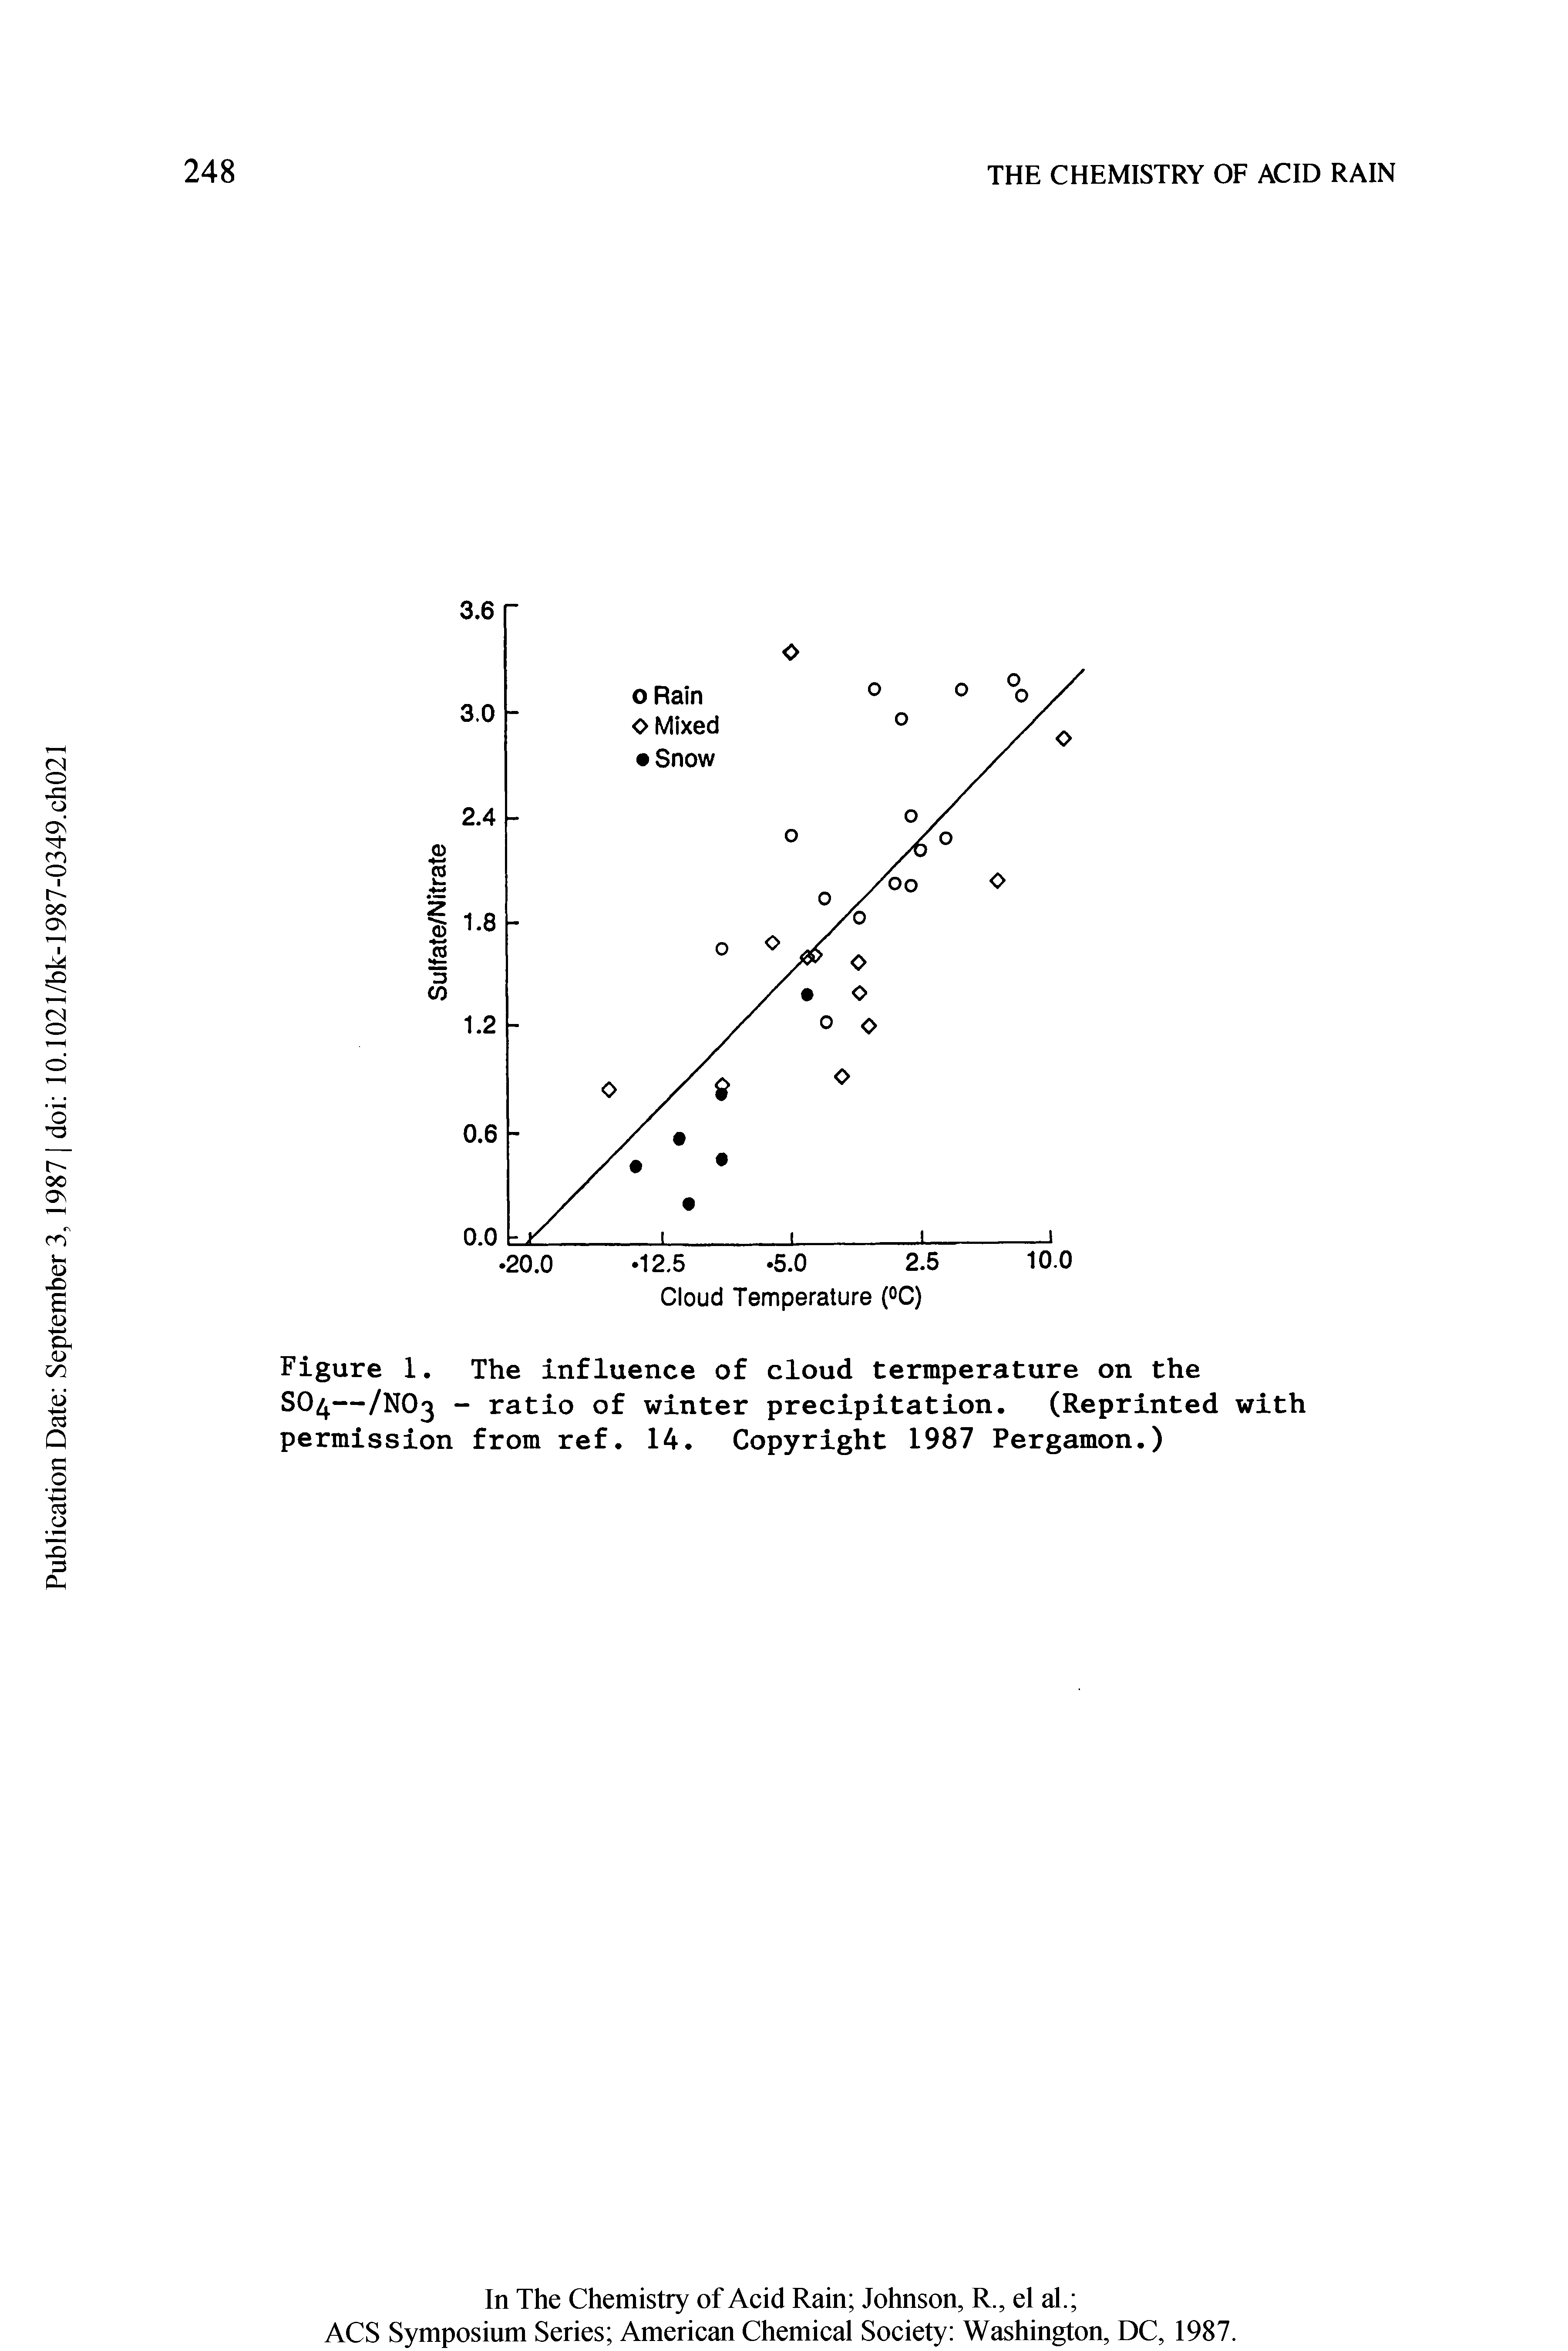 Figure 1. The influence of cloud termperature on the SO4—/NO3 - ratio of winter precipitation. (Reprinted with permission from ref. 14. Copyright 1987 Pergamon.)...